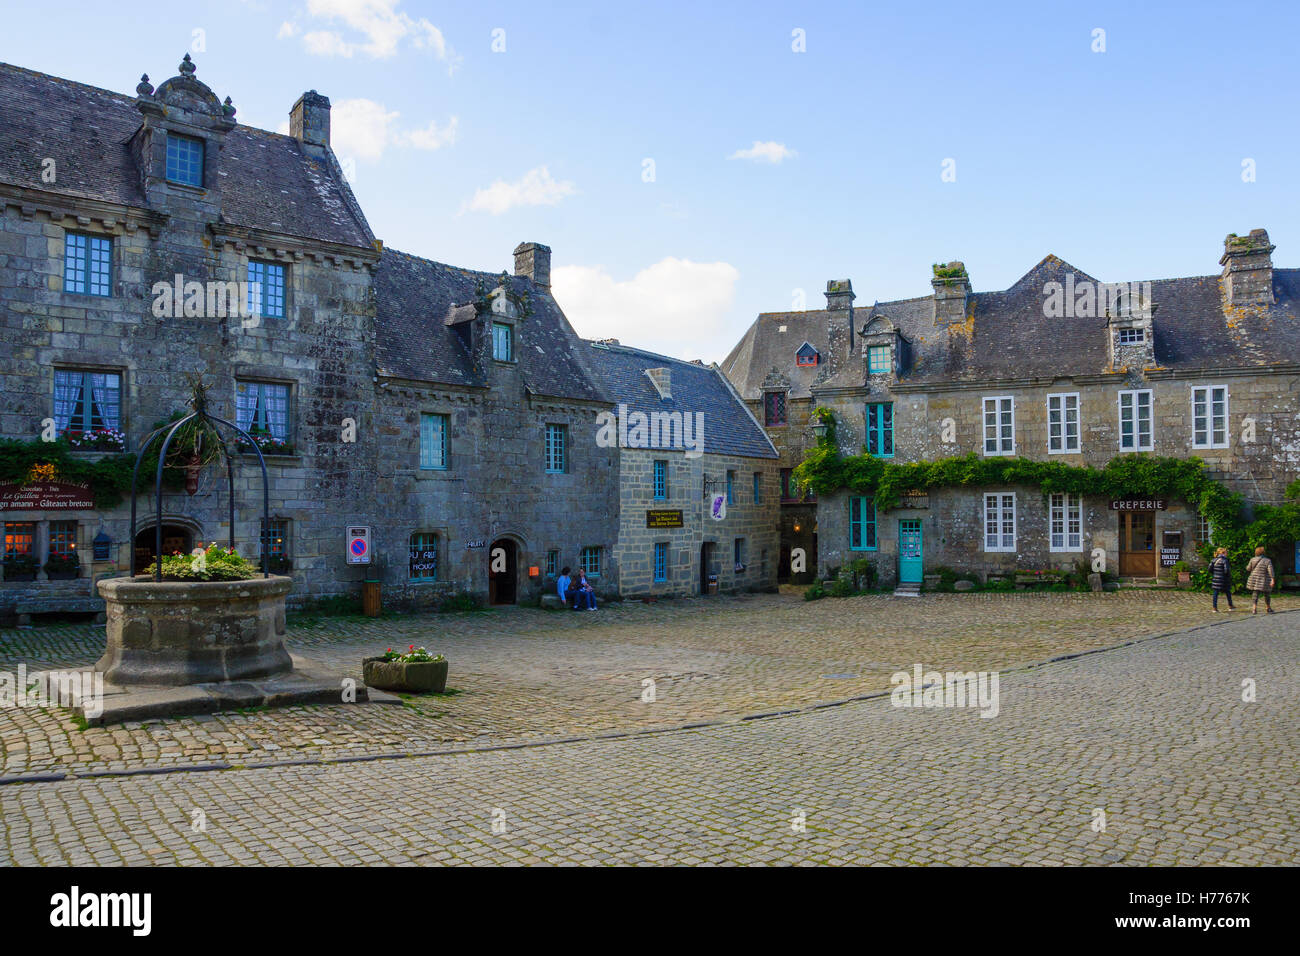 LOCRONAN, FRANCE - SEPTEMBER 29, 2012: Typical buildings, with locals and visitors, in Locronan, Brittany, France Stock Photo